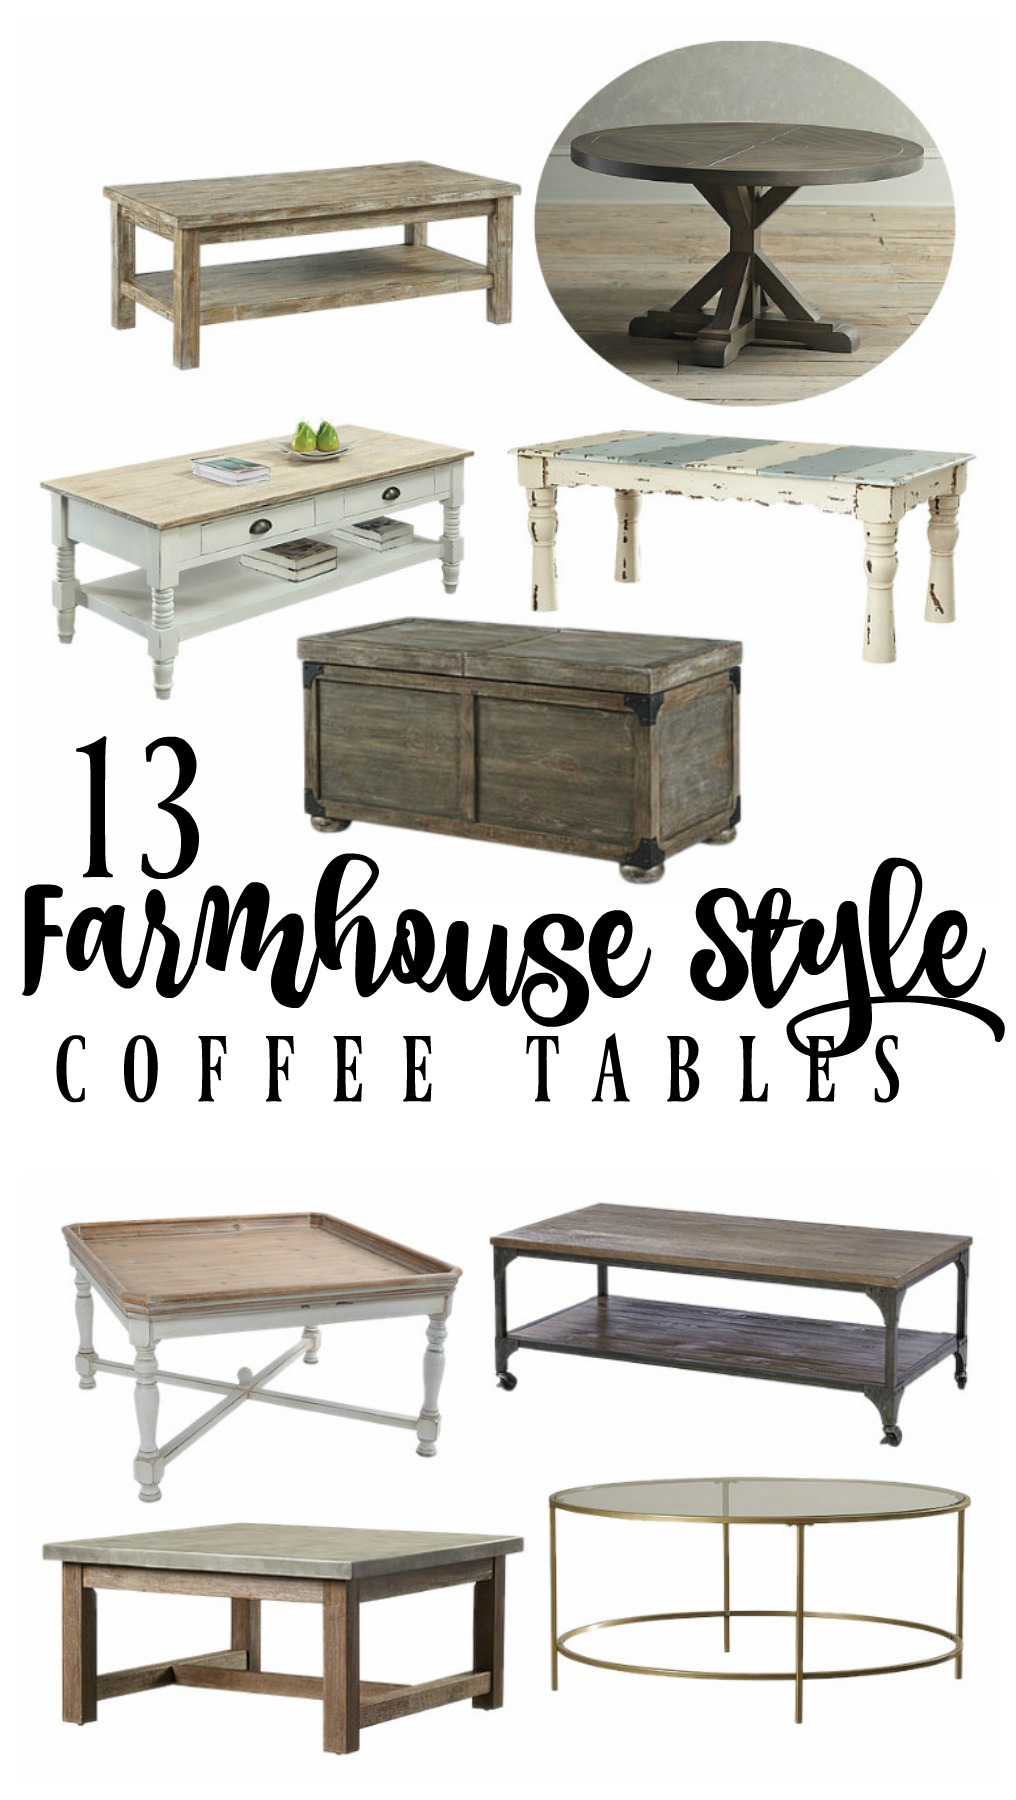 Farmhouse Style Wooden Trunk Coffee Table Ideas - Rooms For Rent blog